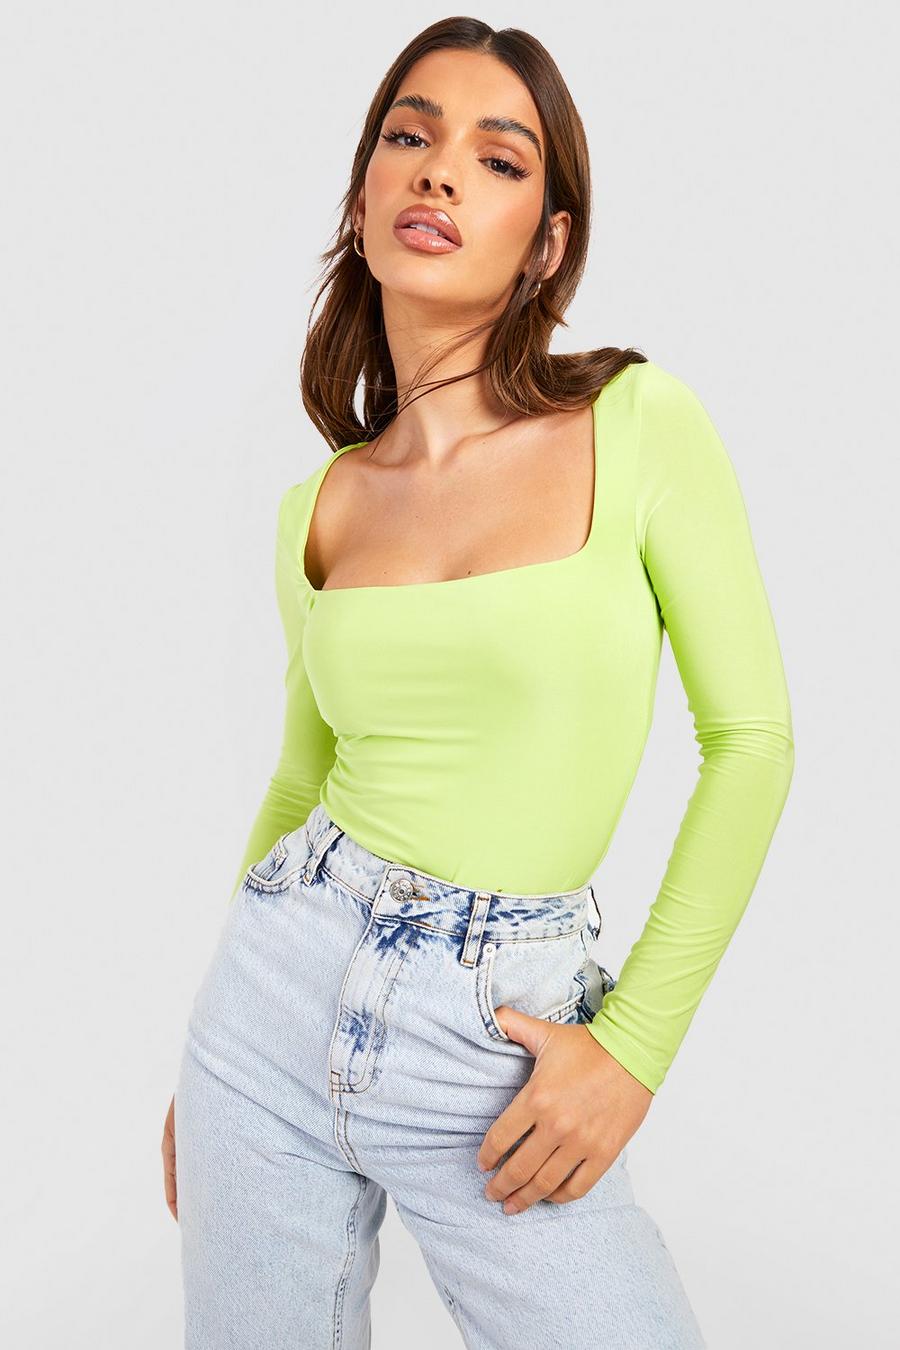 Track Essential Long Sleeve Scoop Neck Bodysuit - Neon Green - S/M at